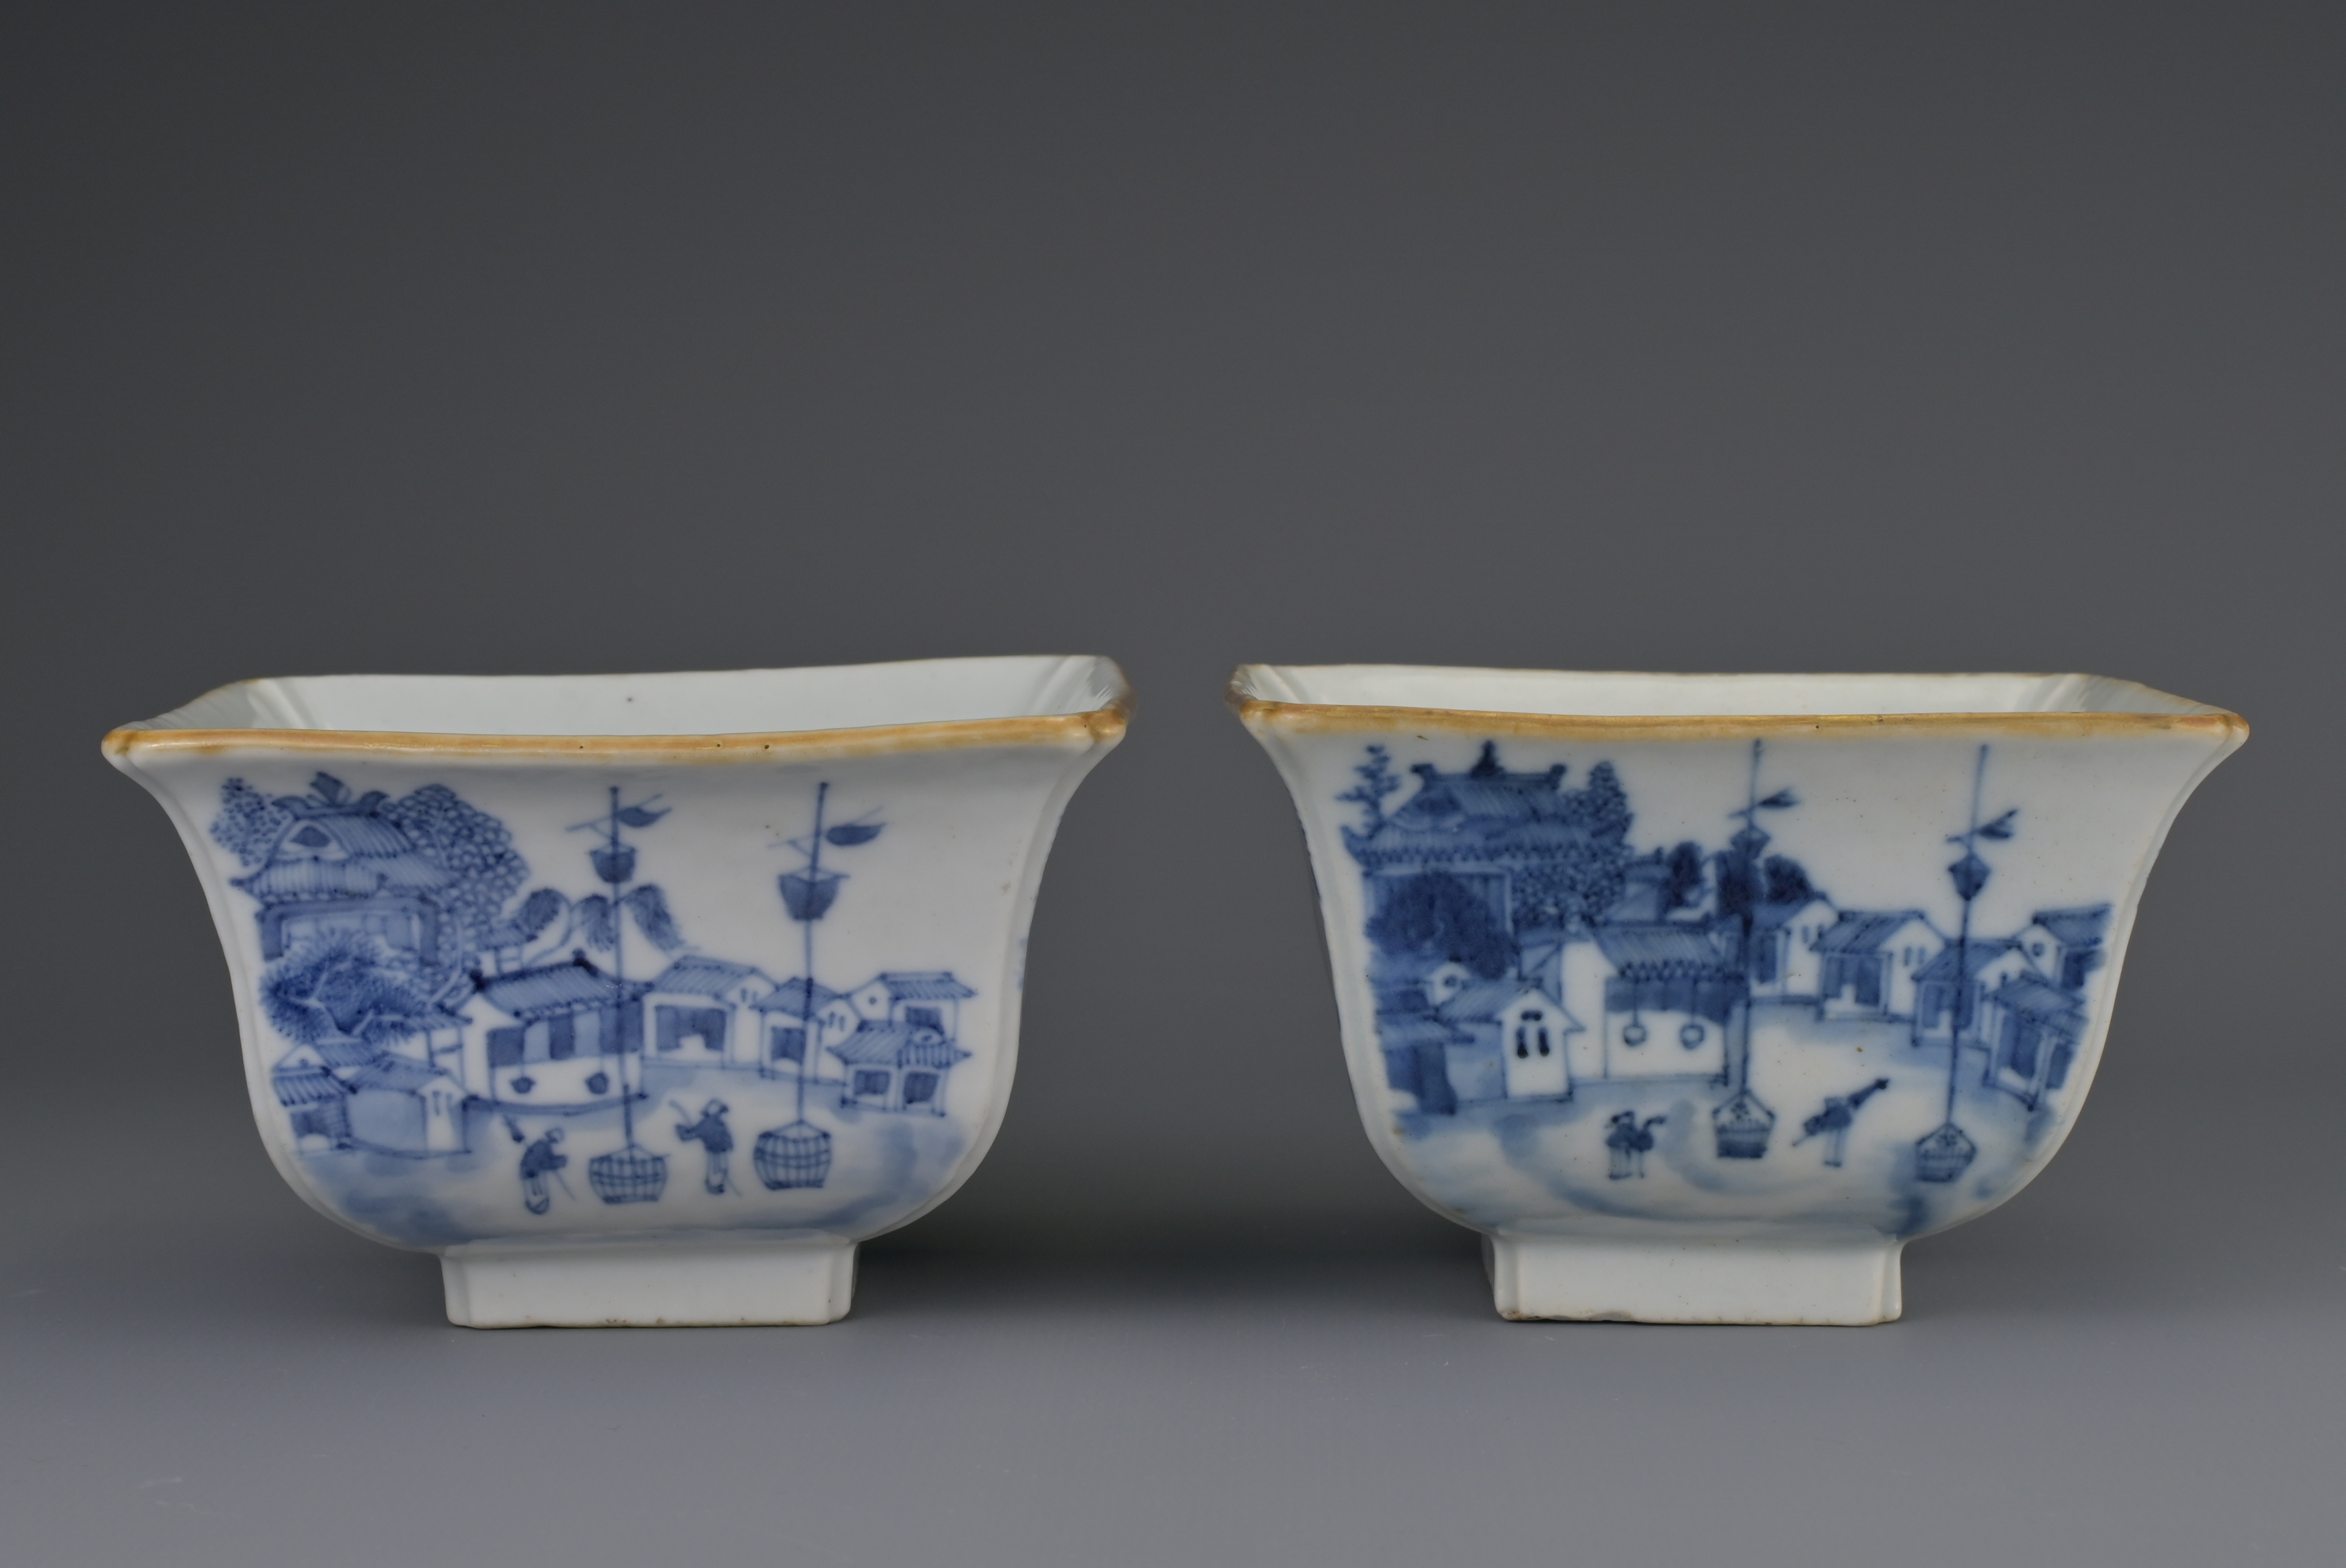 PAIR OF CHINESE BLUE AND WHITE PORCELAIN BOWLS, DAOGUANG MARK AND PERIOD, 19th CENTURY - Image 4 of 9